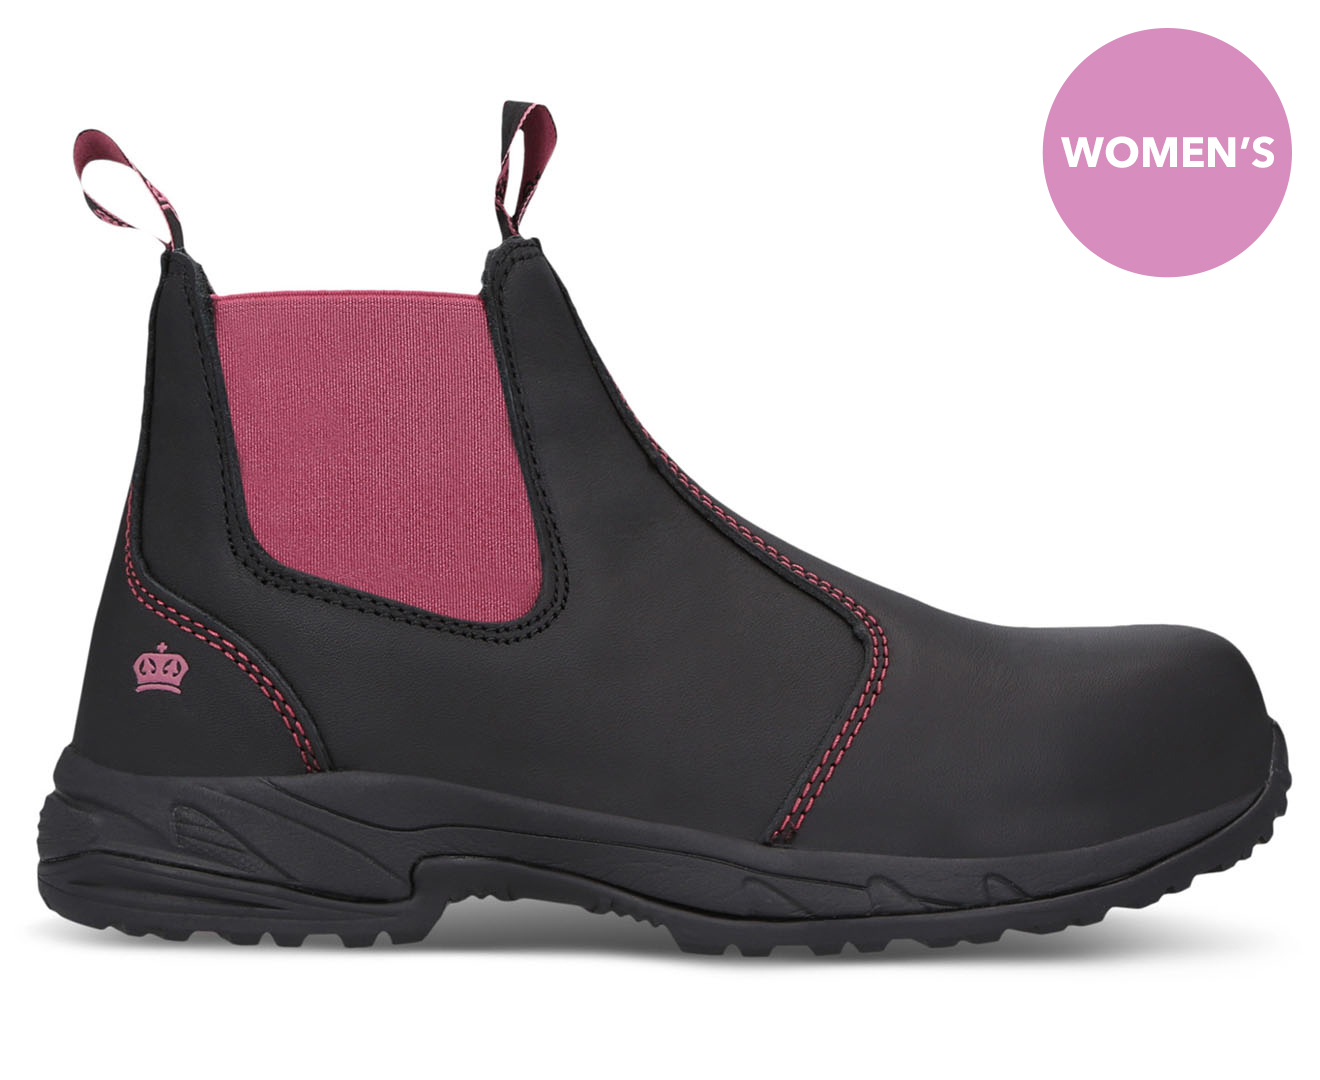 KingGee Women's Tradie Pull Up Work Boots - Black/Pink | Catch.co.nz